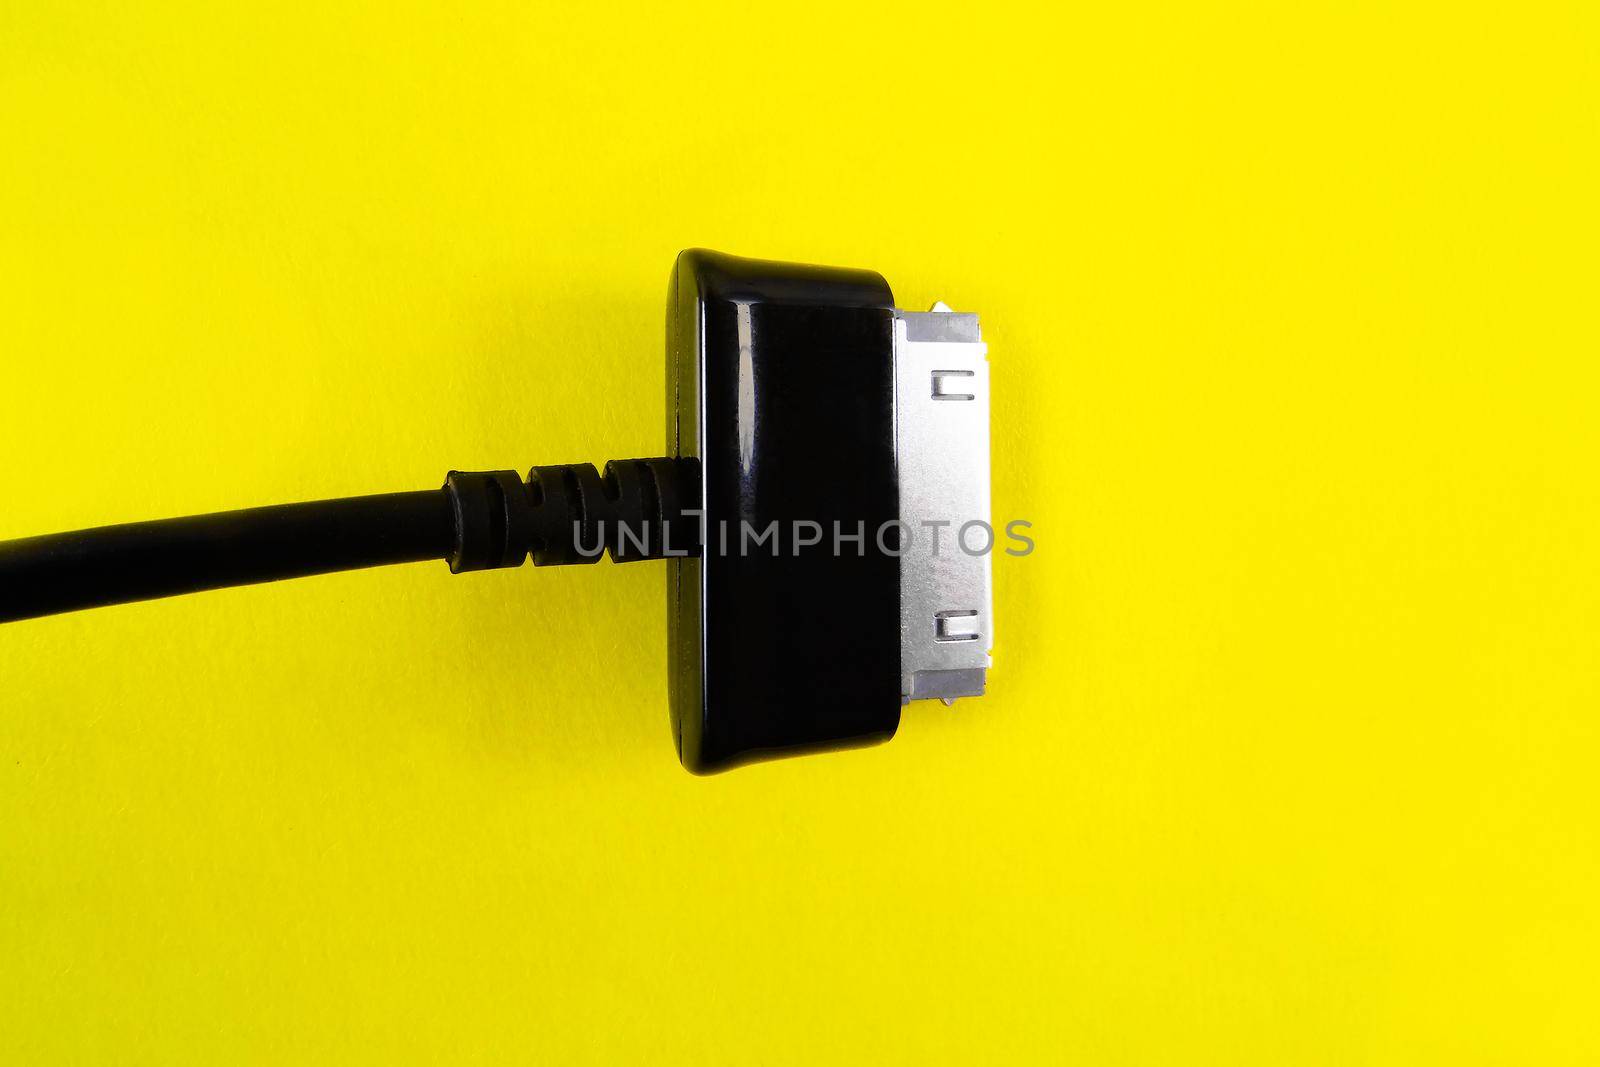 A black socet for tablet on a yellow background. Object.